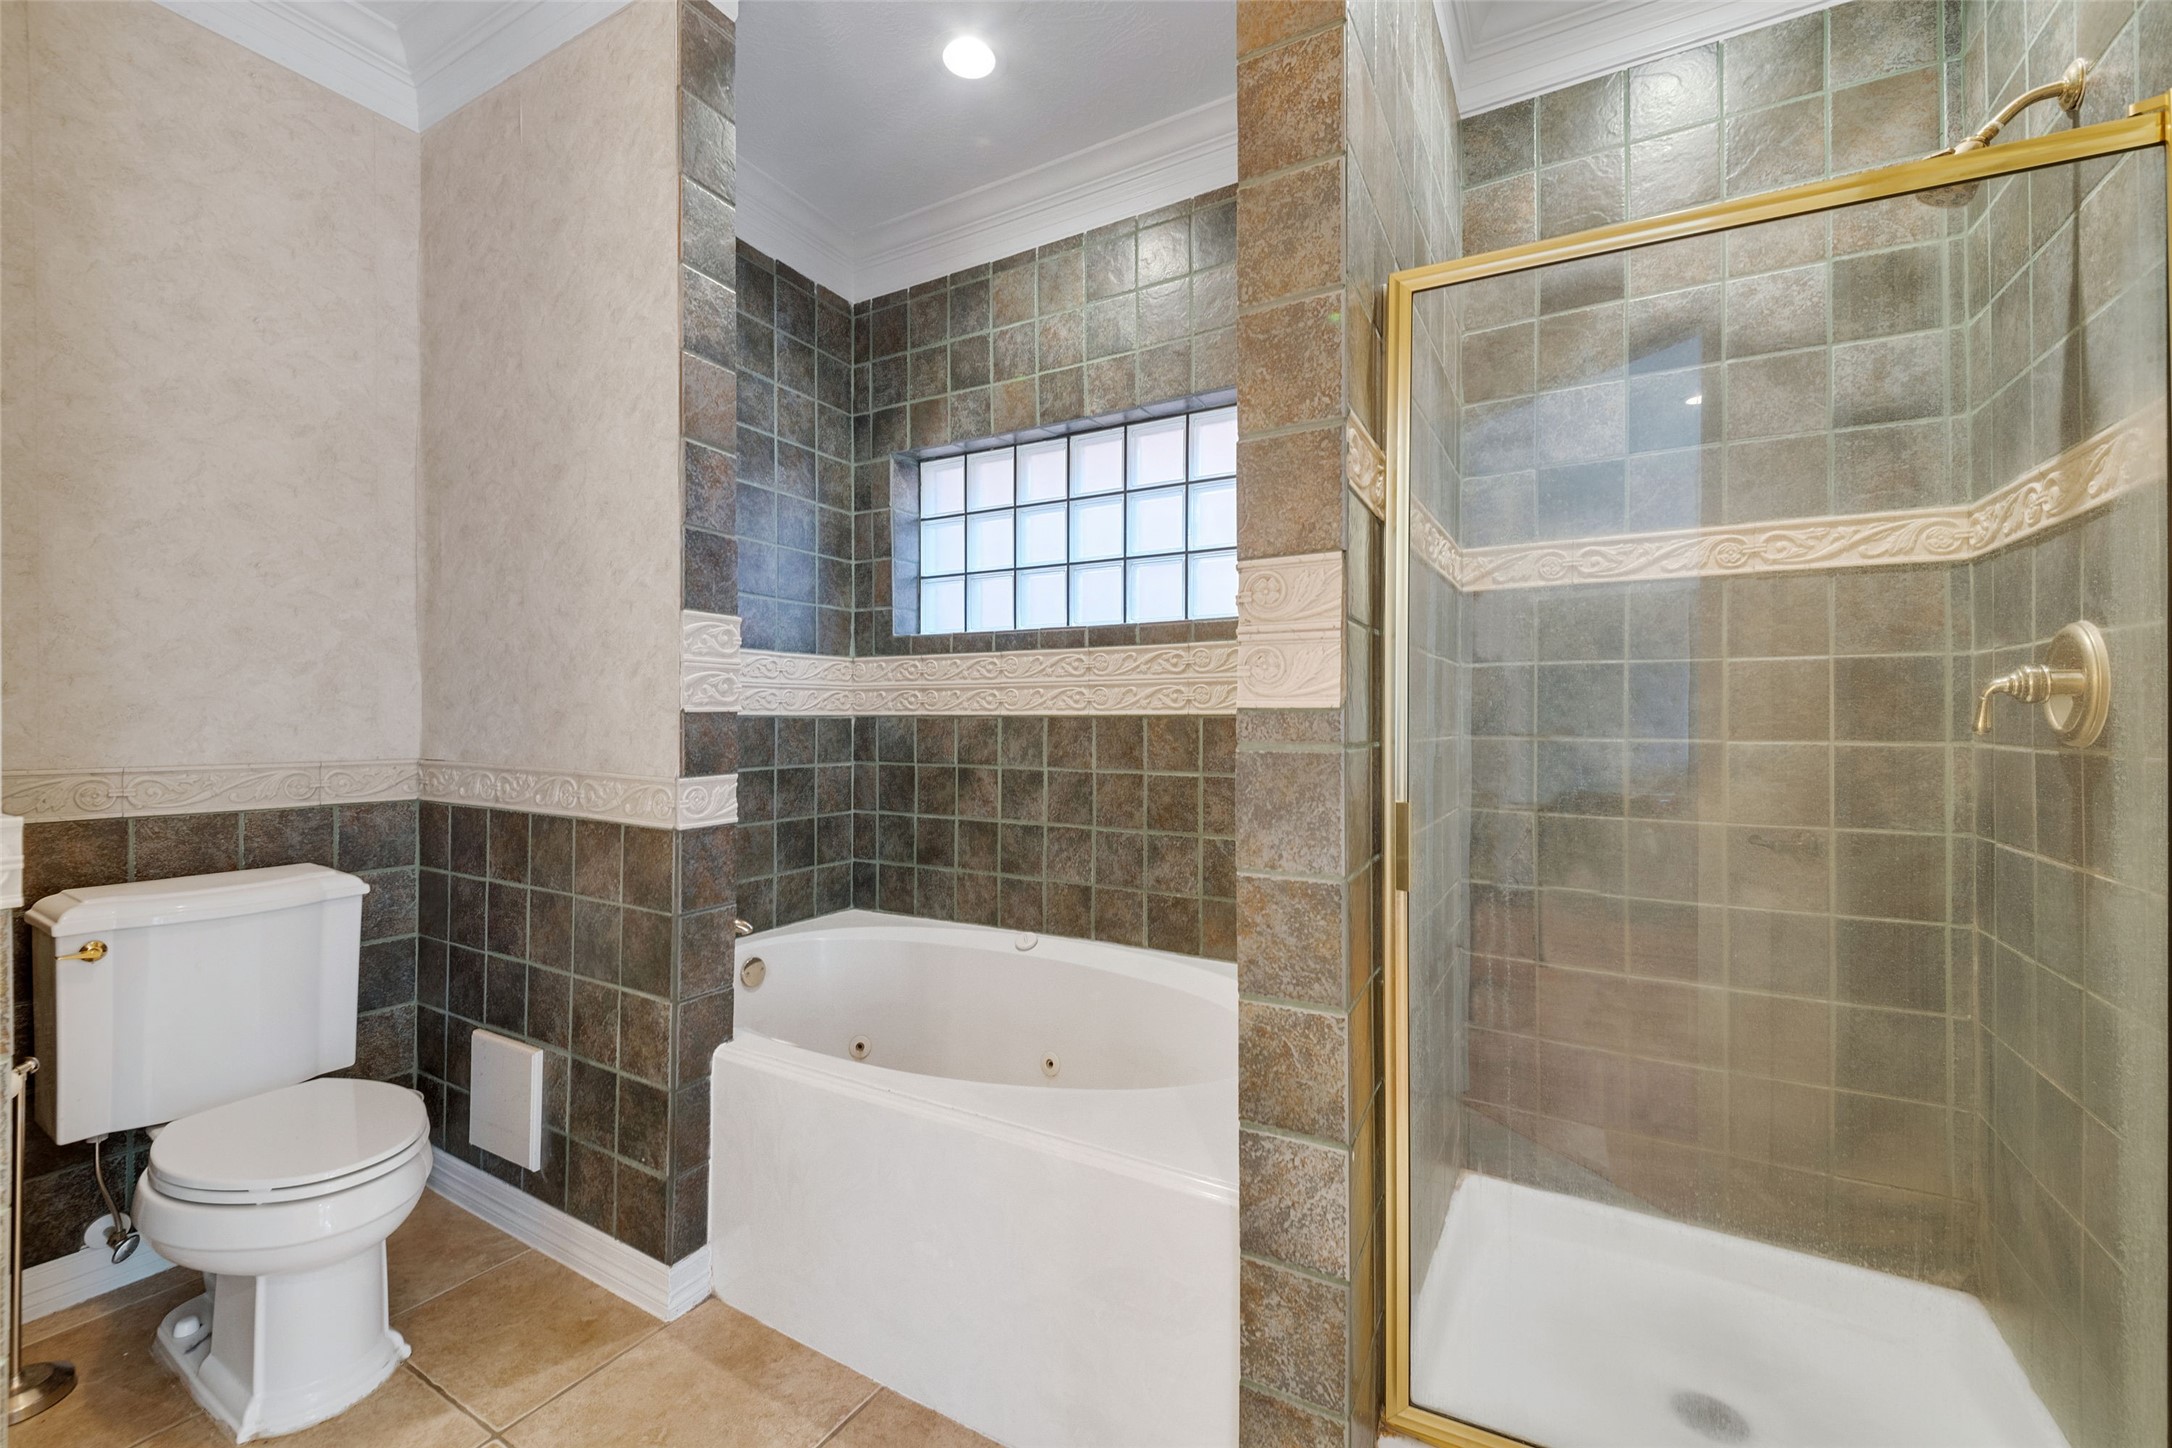 The primary en-suite bathroom has separate shower and jetted tub for ultimate relaxation.